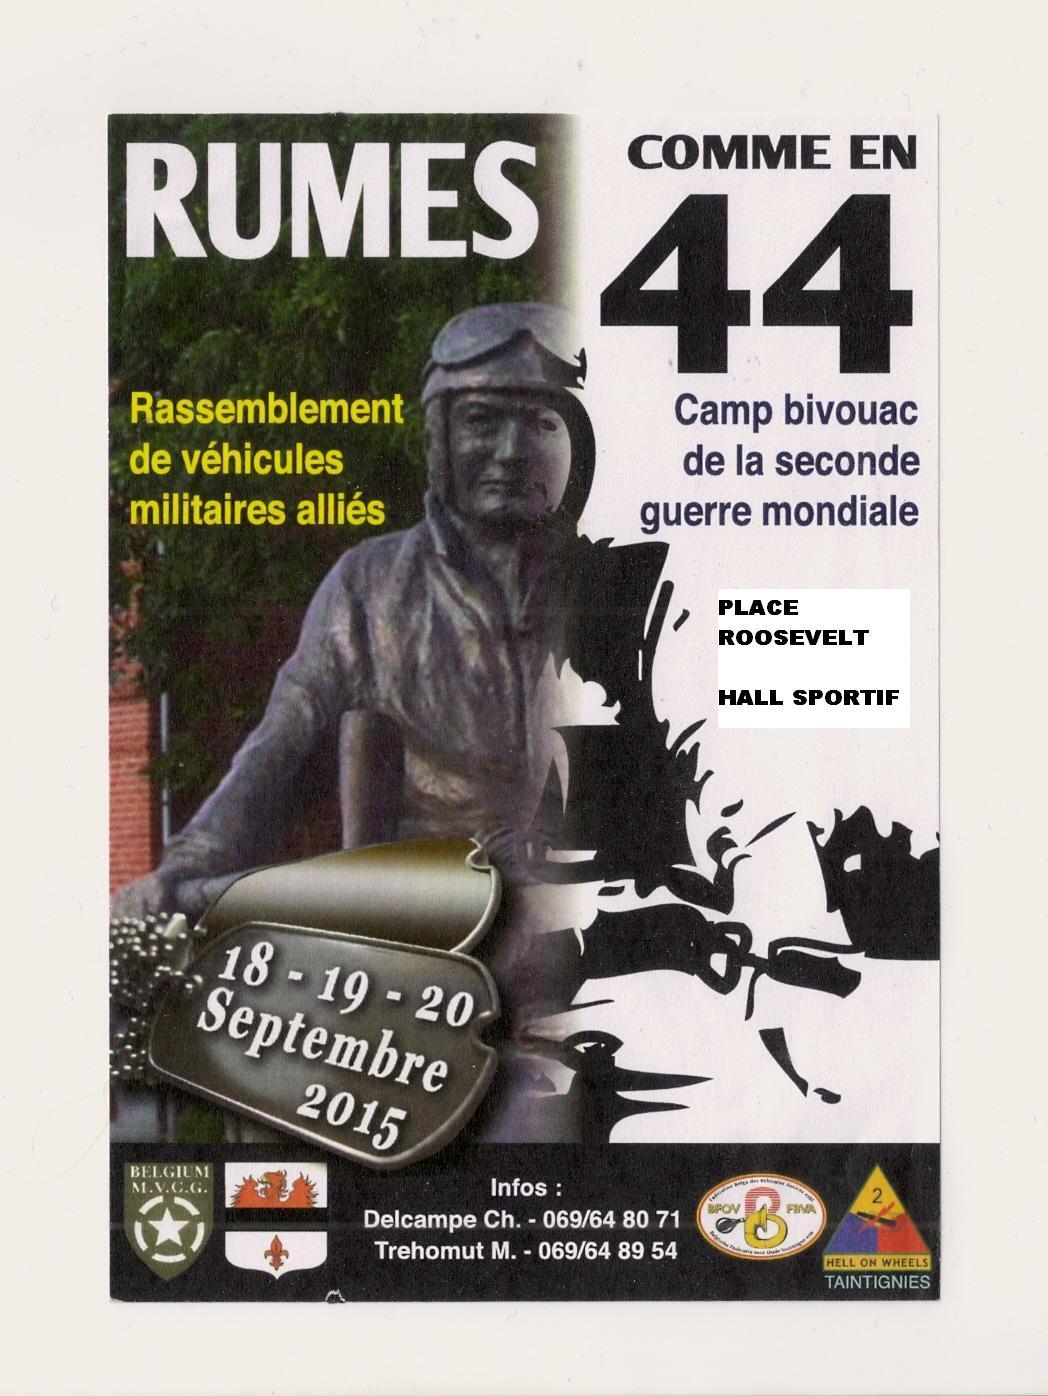 affiche 2015 Rumes comme en 44 2nd armored taintignies